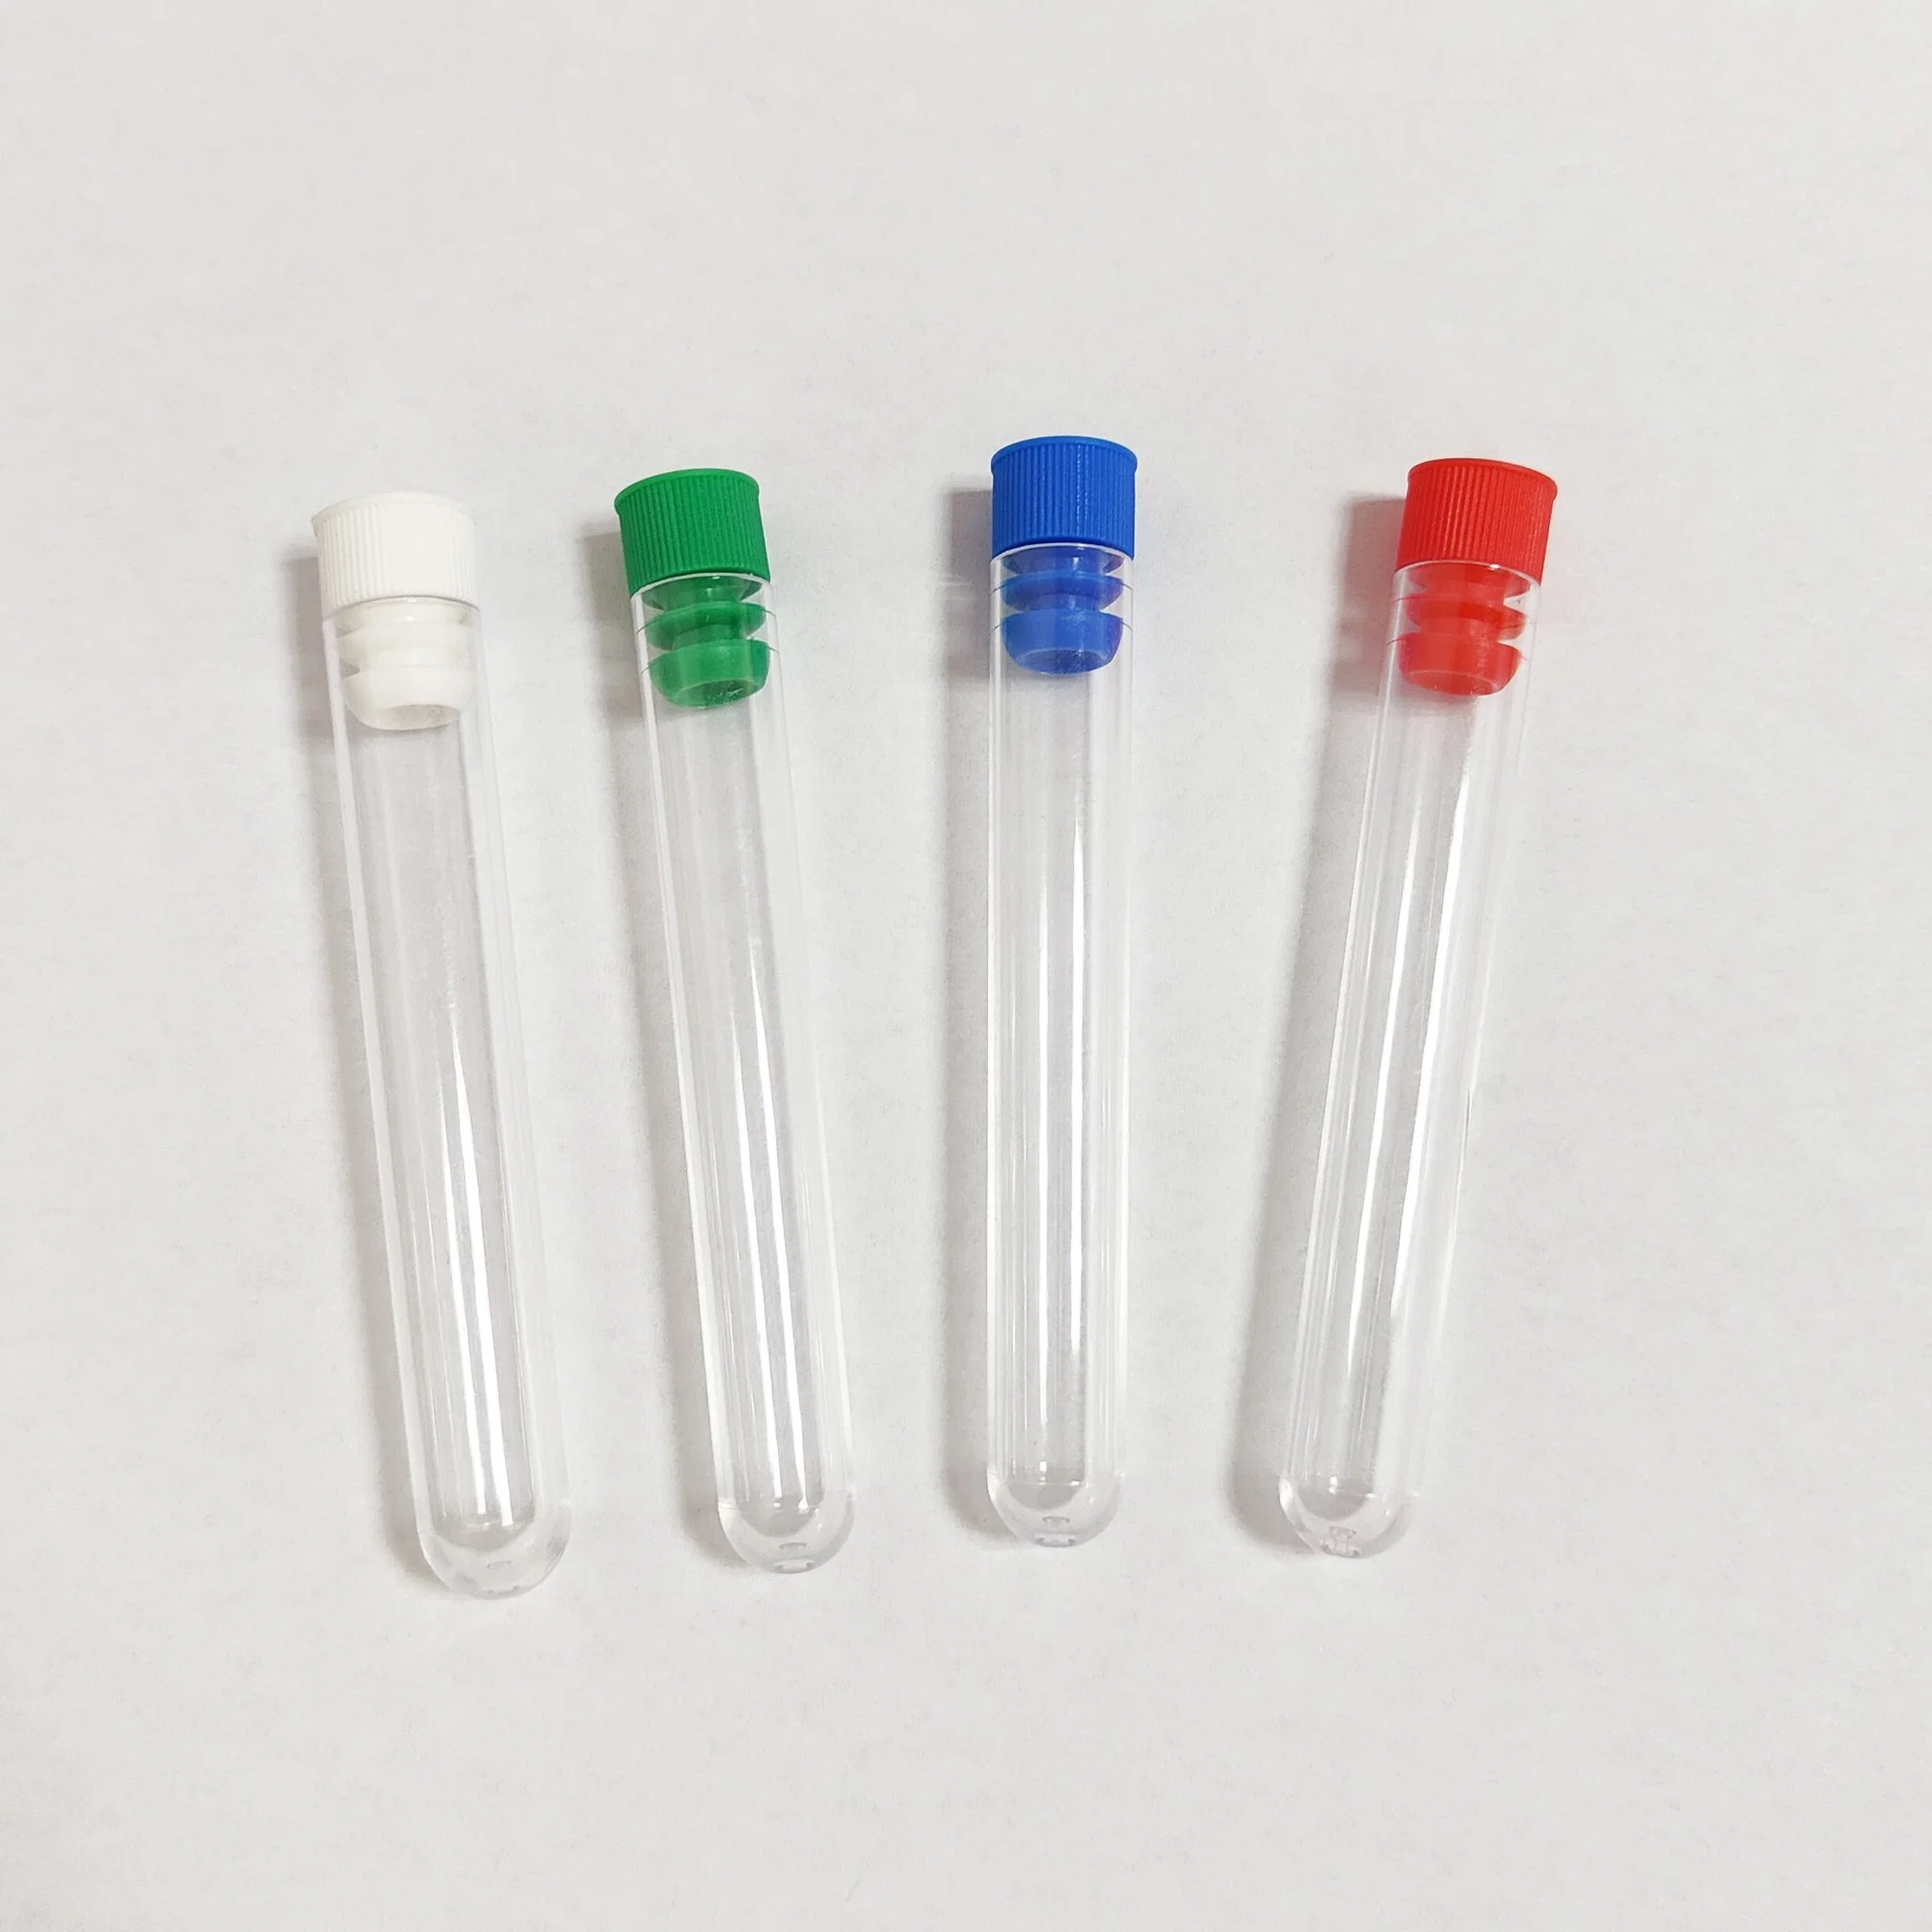 Laboratory Wholesale/Supplier Medical Plastic Test Tube with Screw Cap